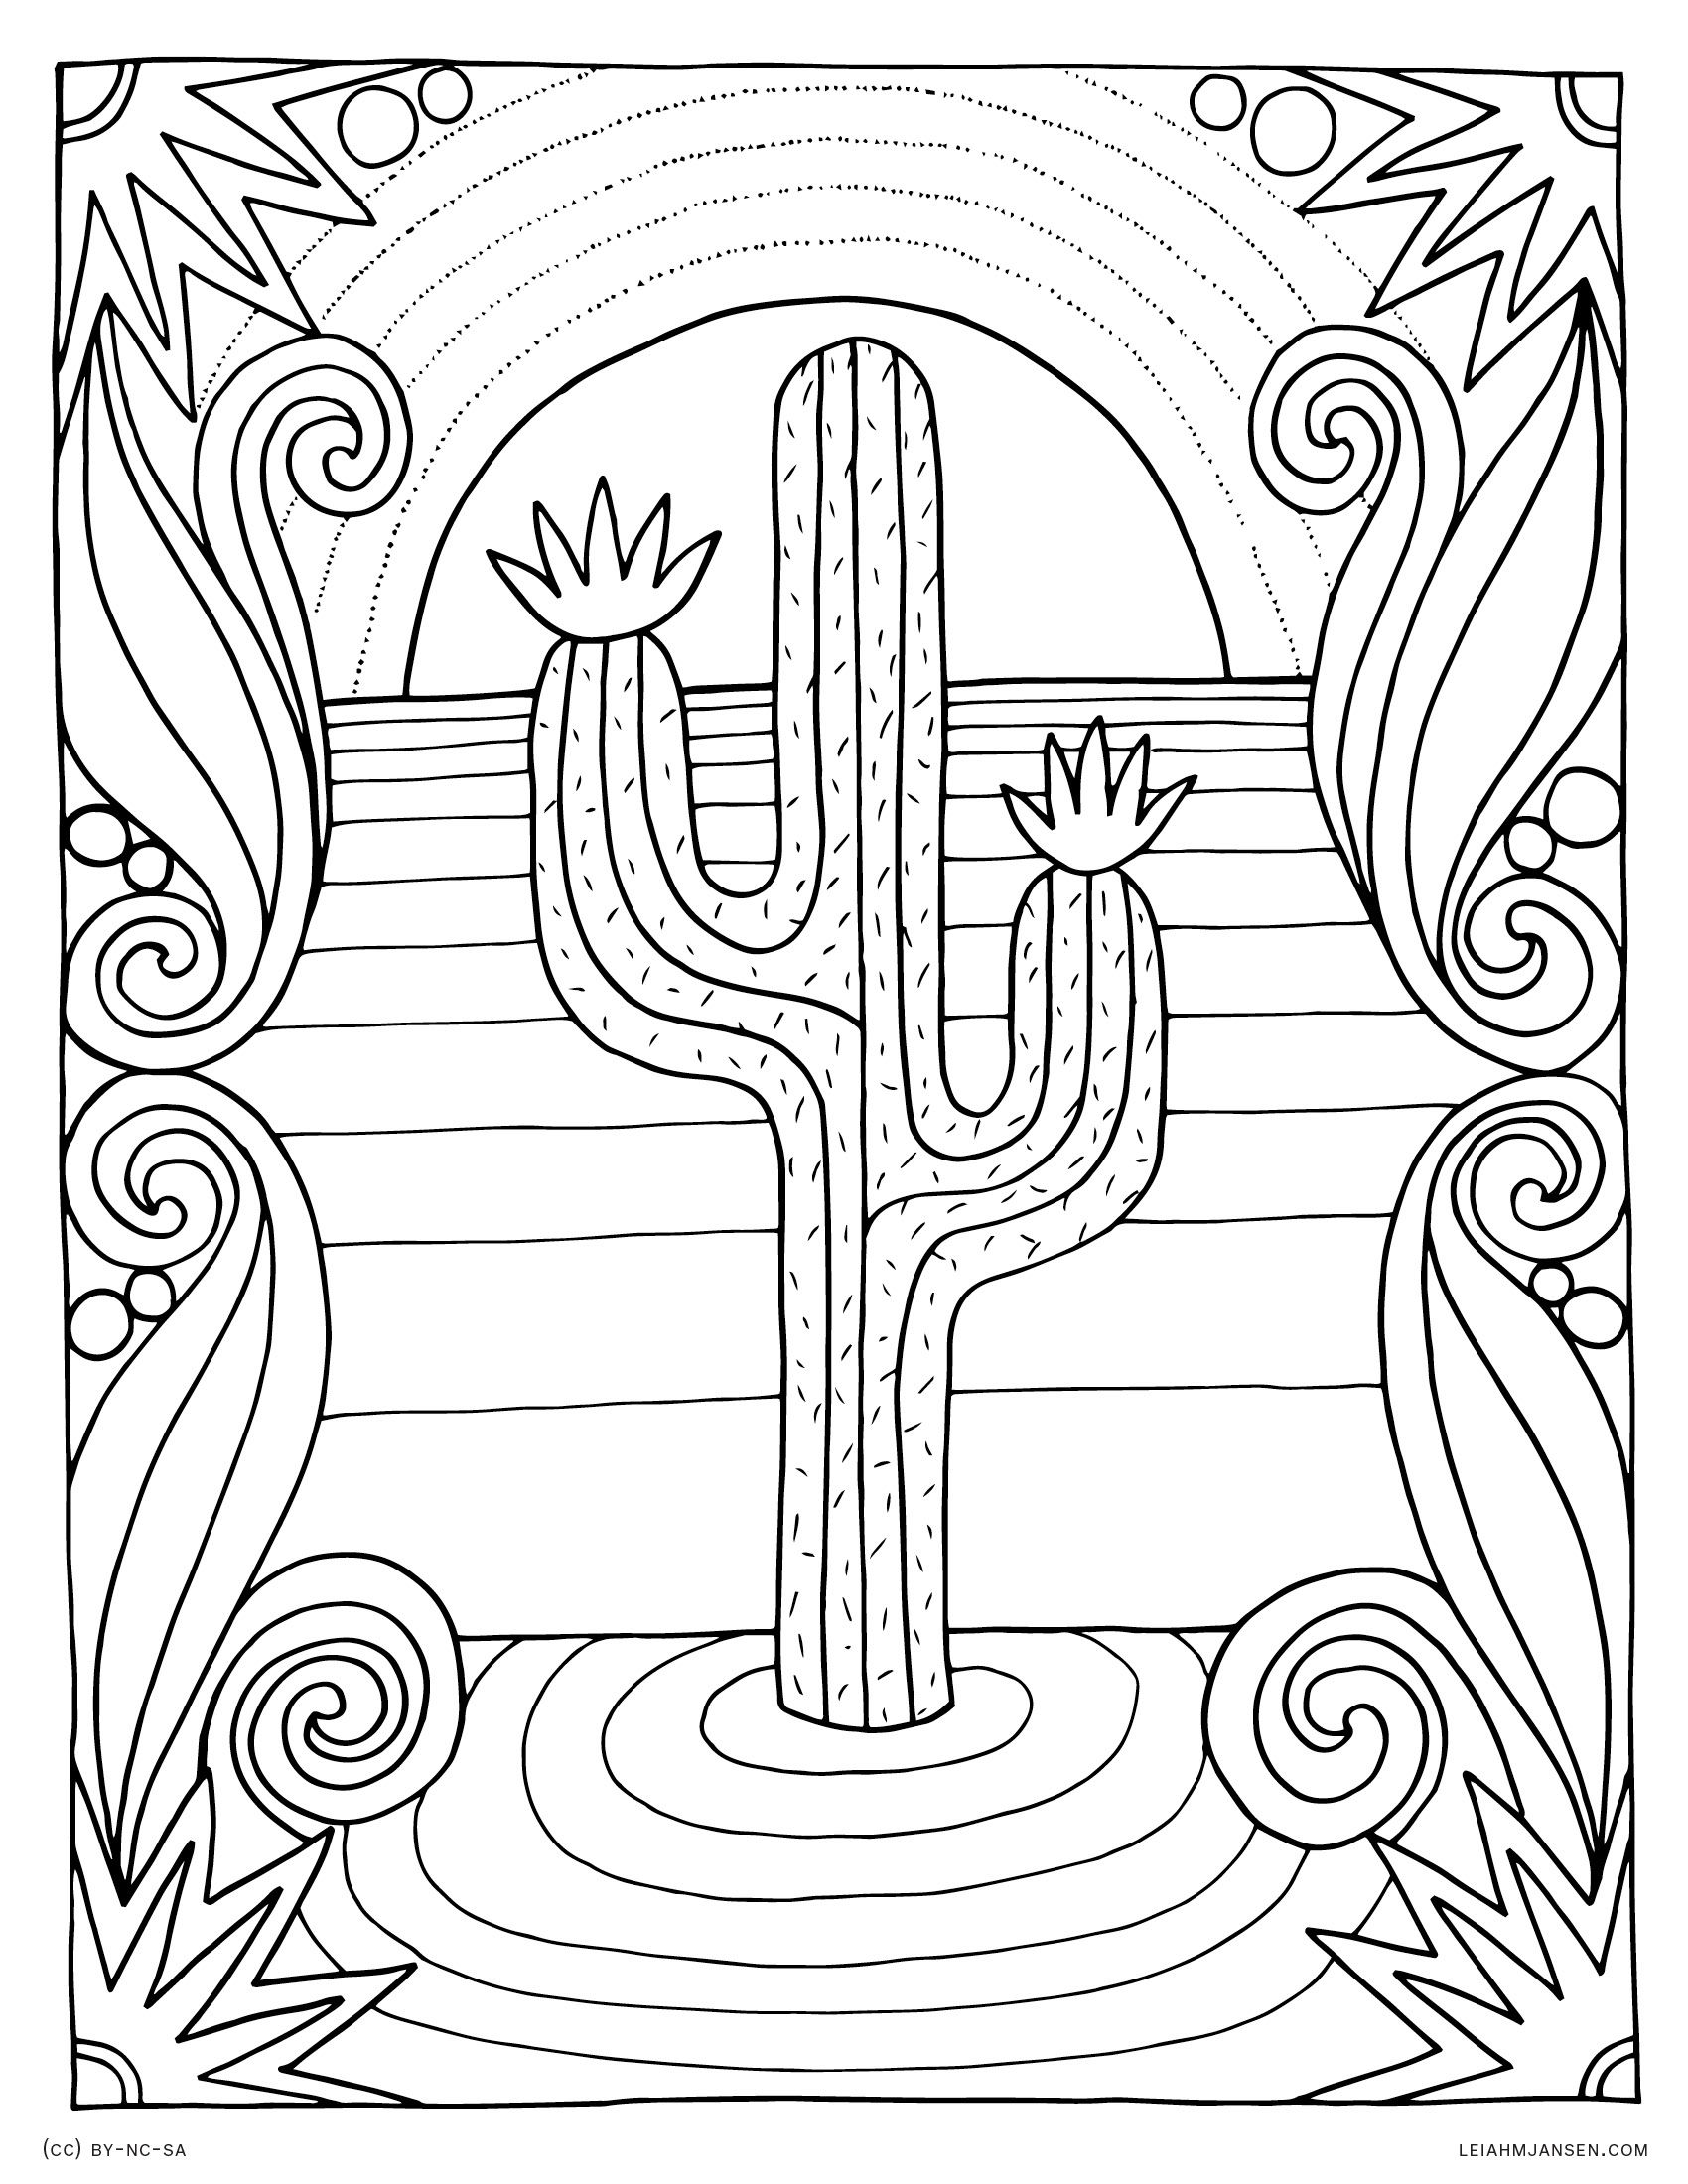 Sunset Coloring Pages - Coloring Home